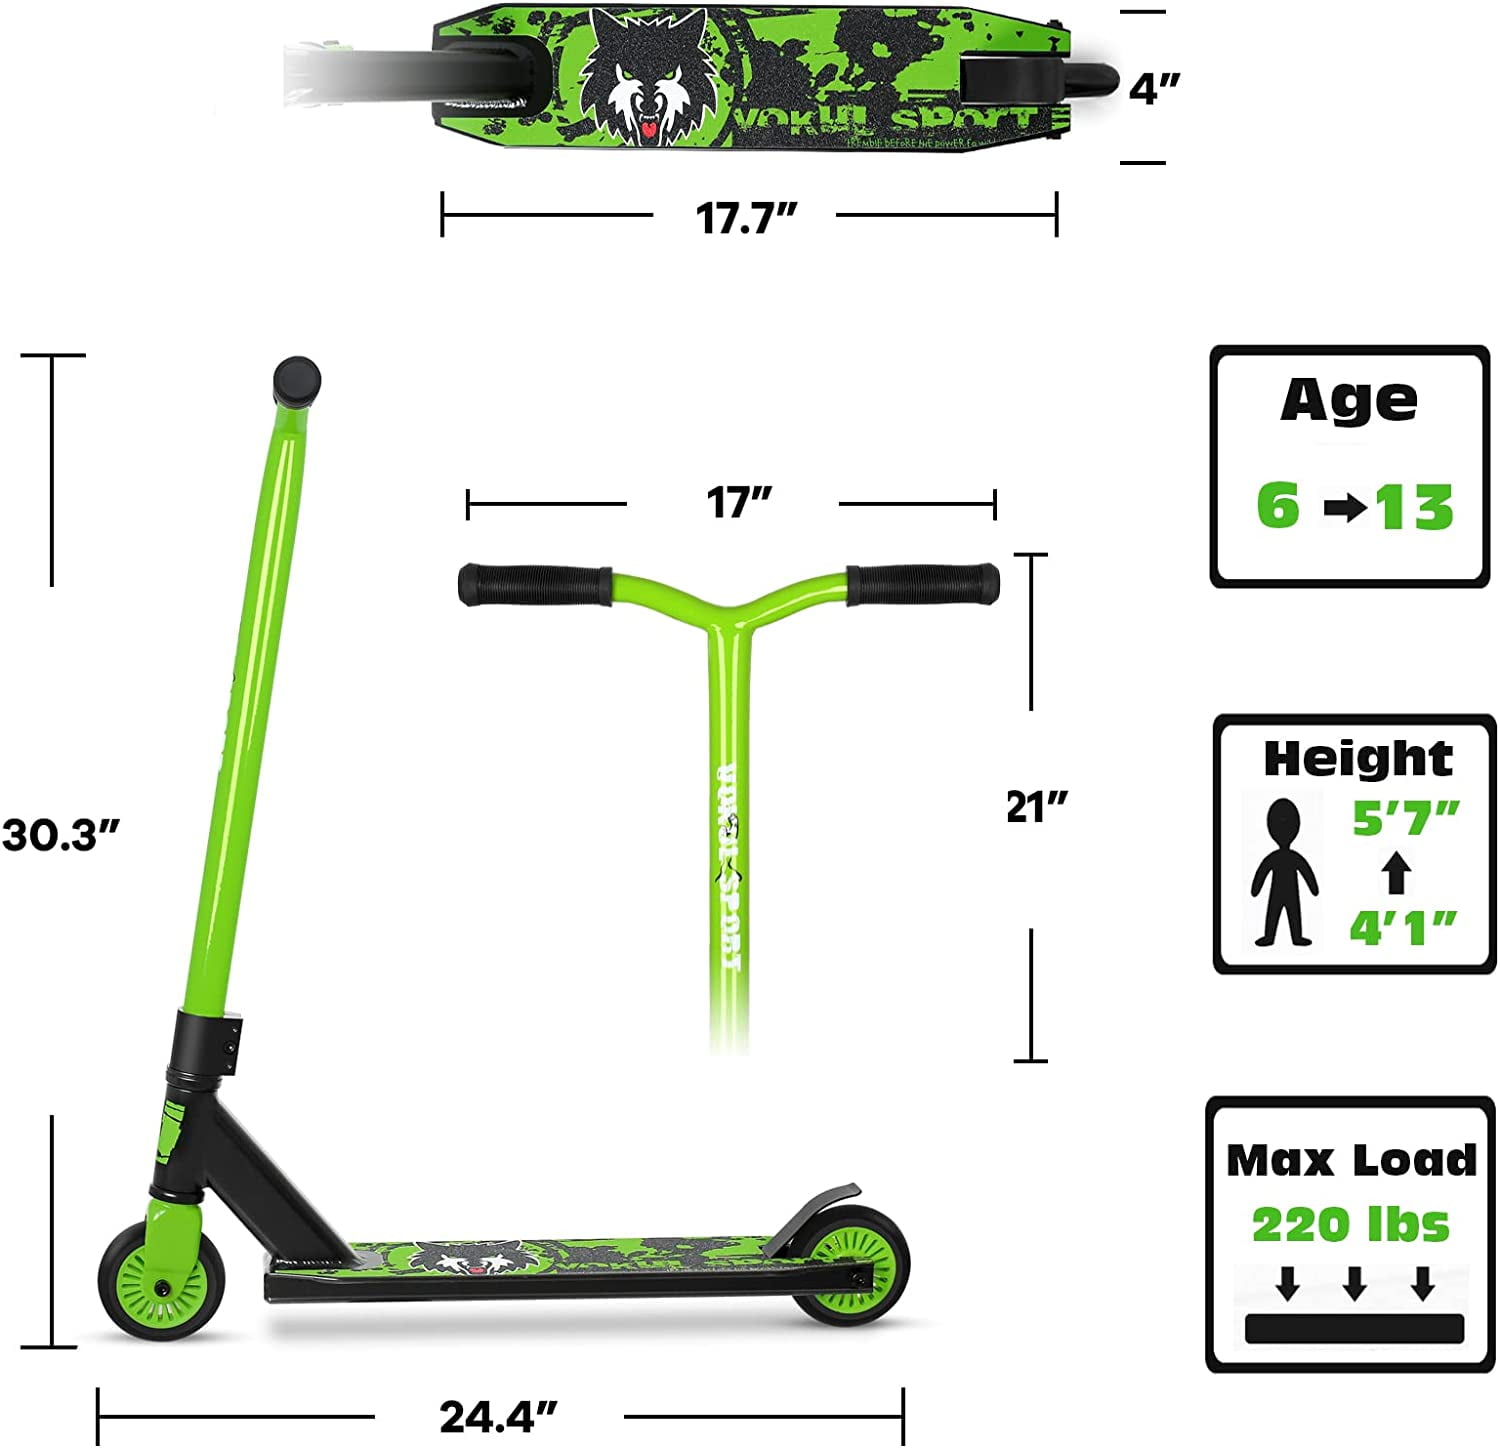 Trigger Tricks 55 Black freestyle scooter for young beginner riders.